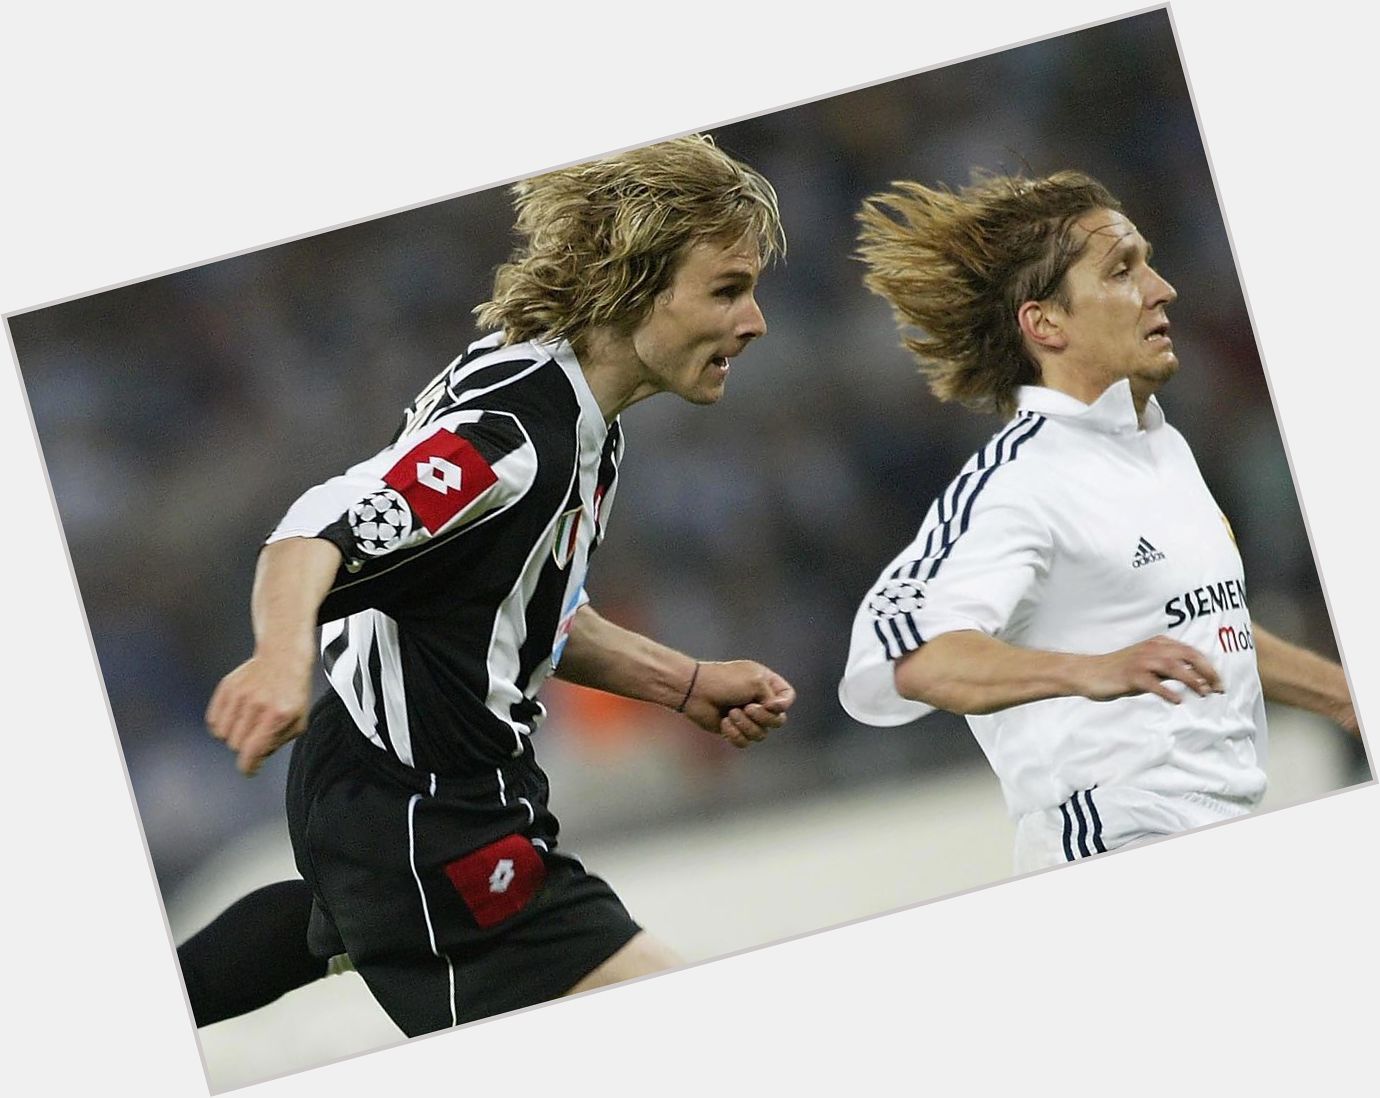 That run, that shot, that goal and that leap.
Happy Birthday Czech Furry, Pavel Nedved     